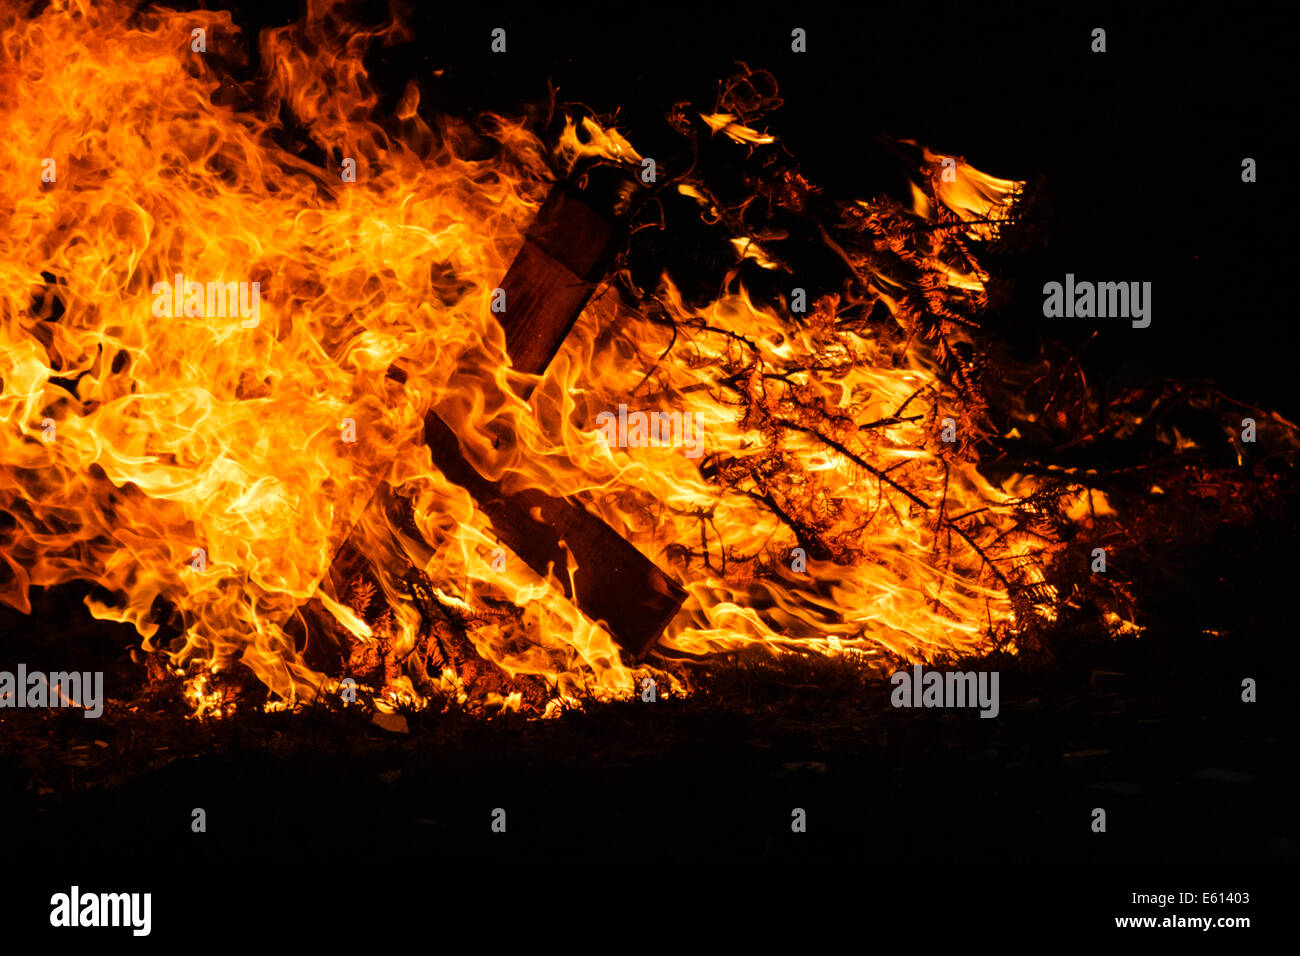 Disposed christmas tree on fire Stock Photo